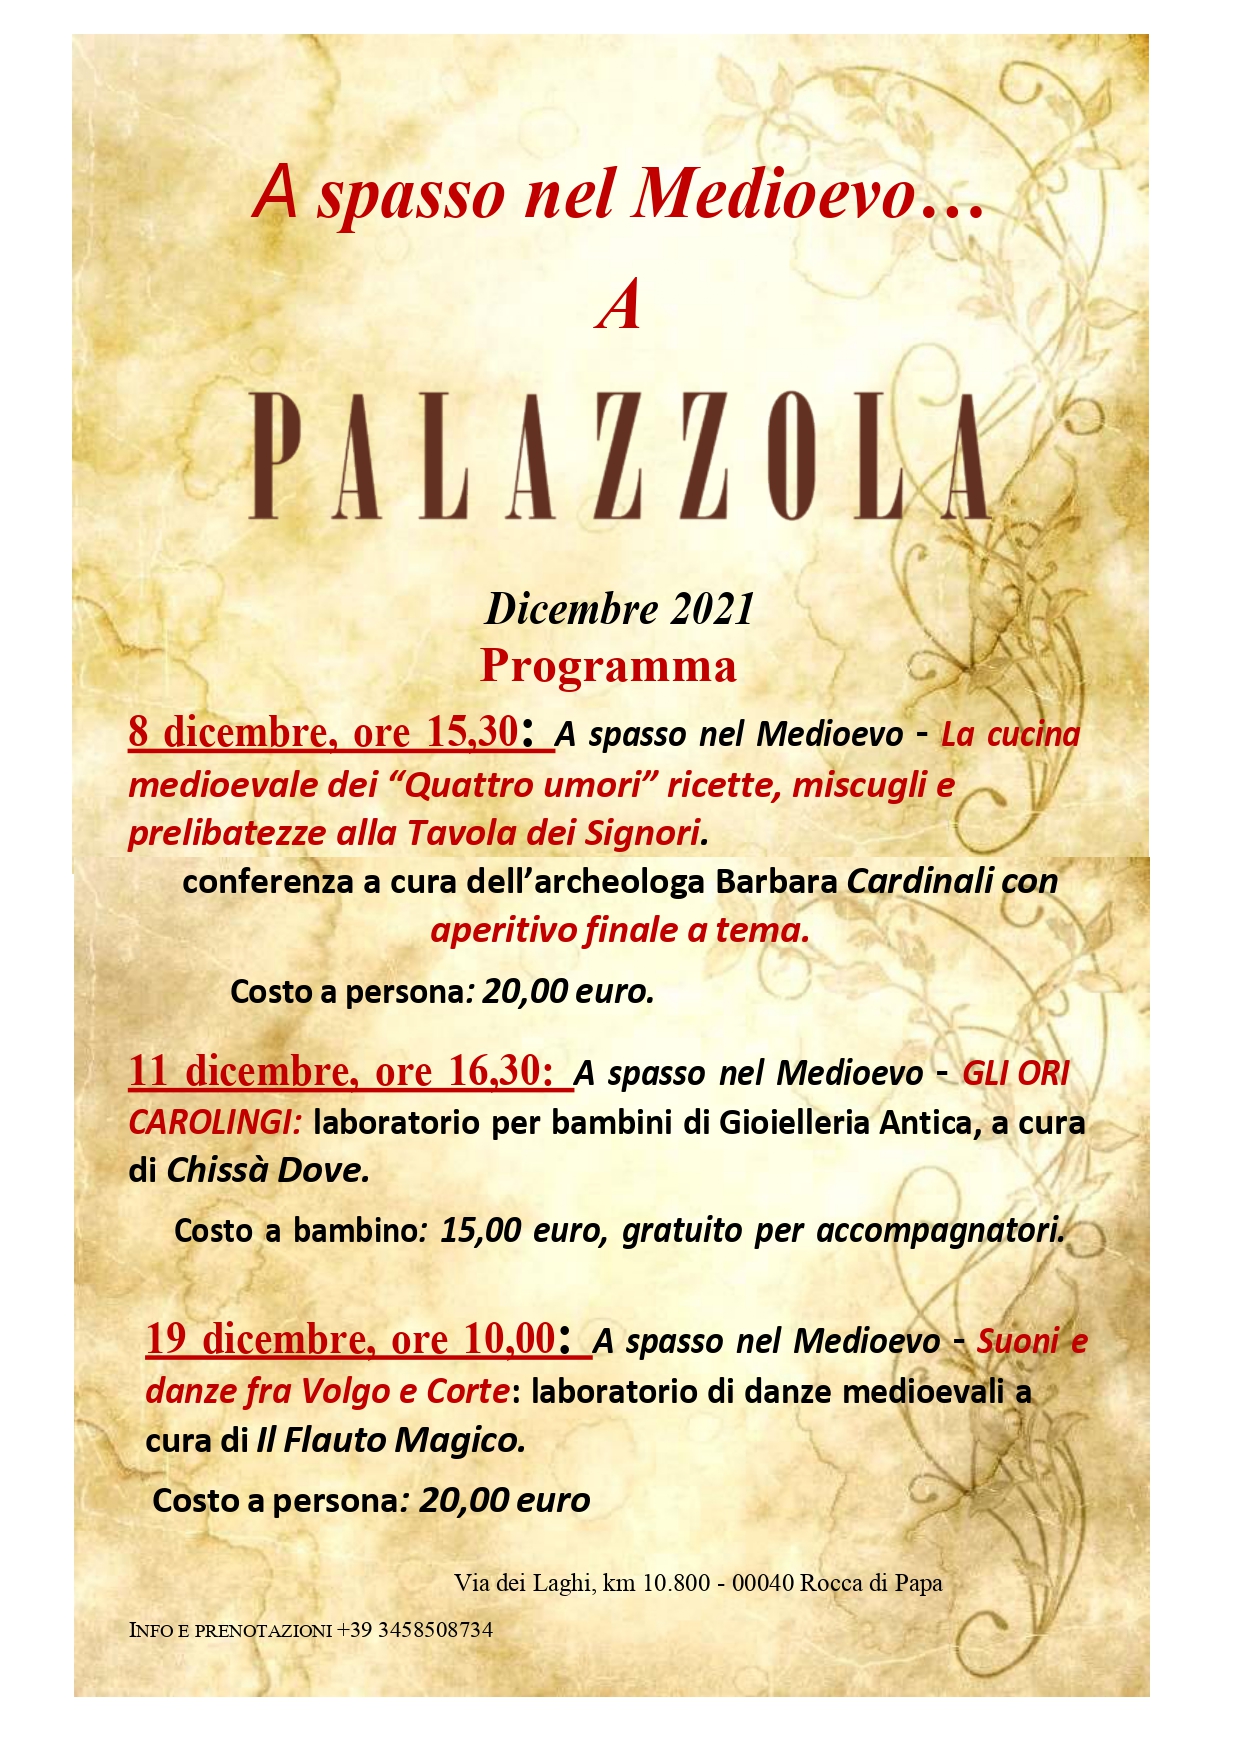 Palazzola events